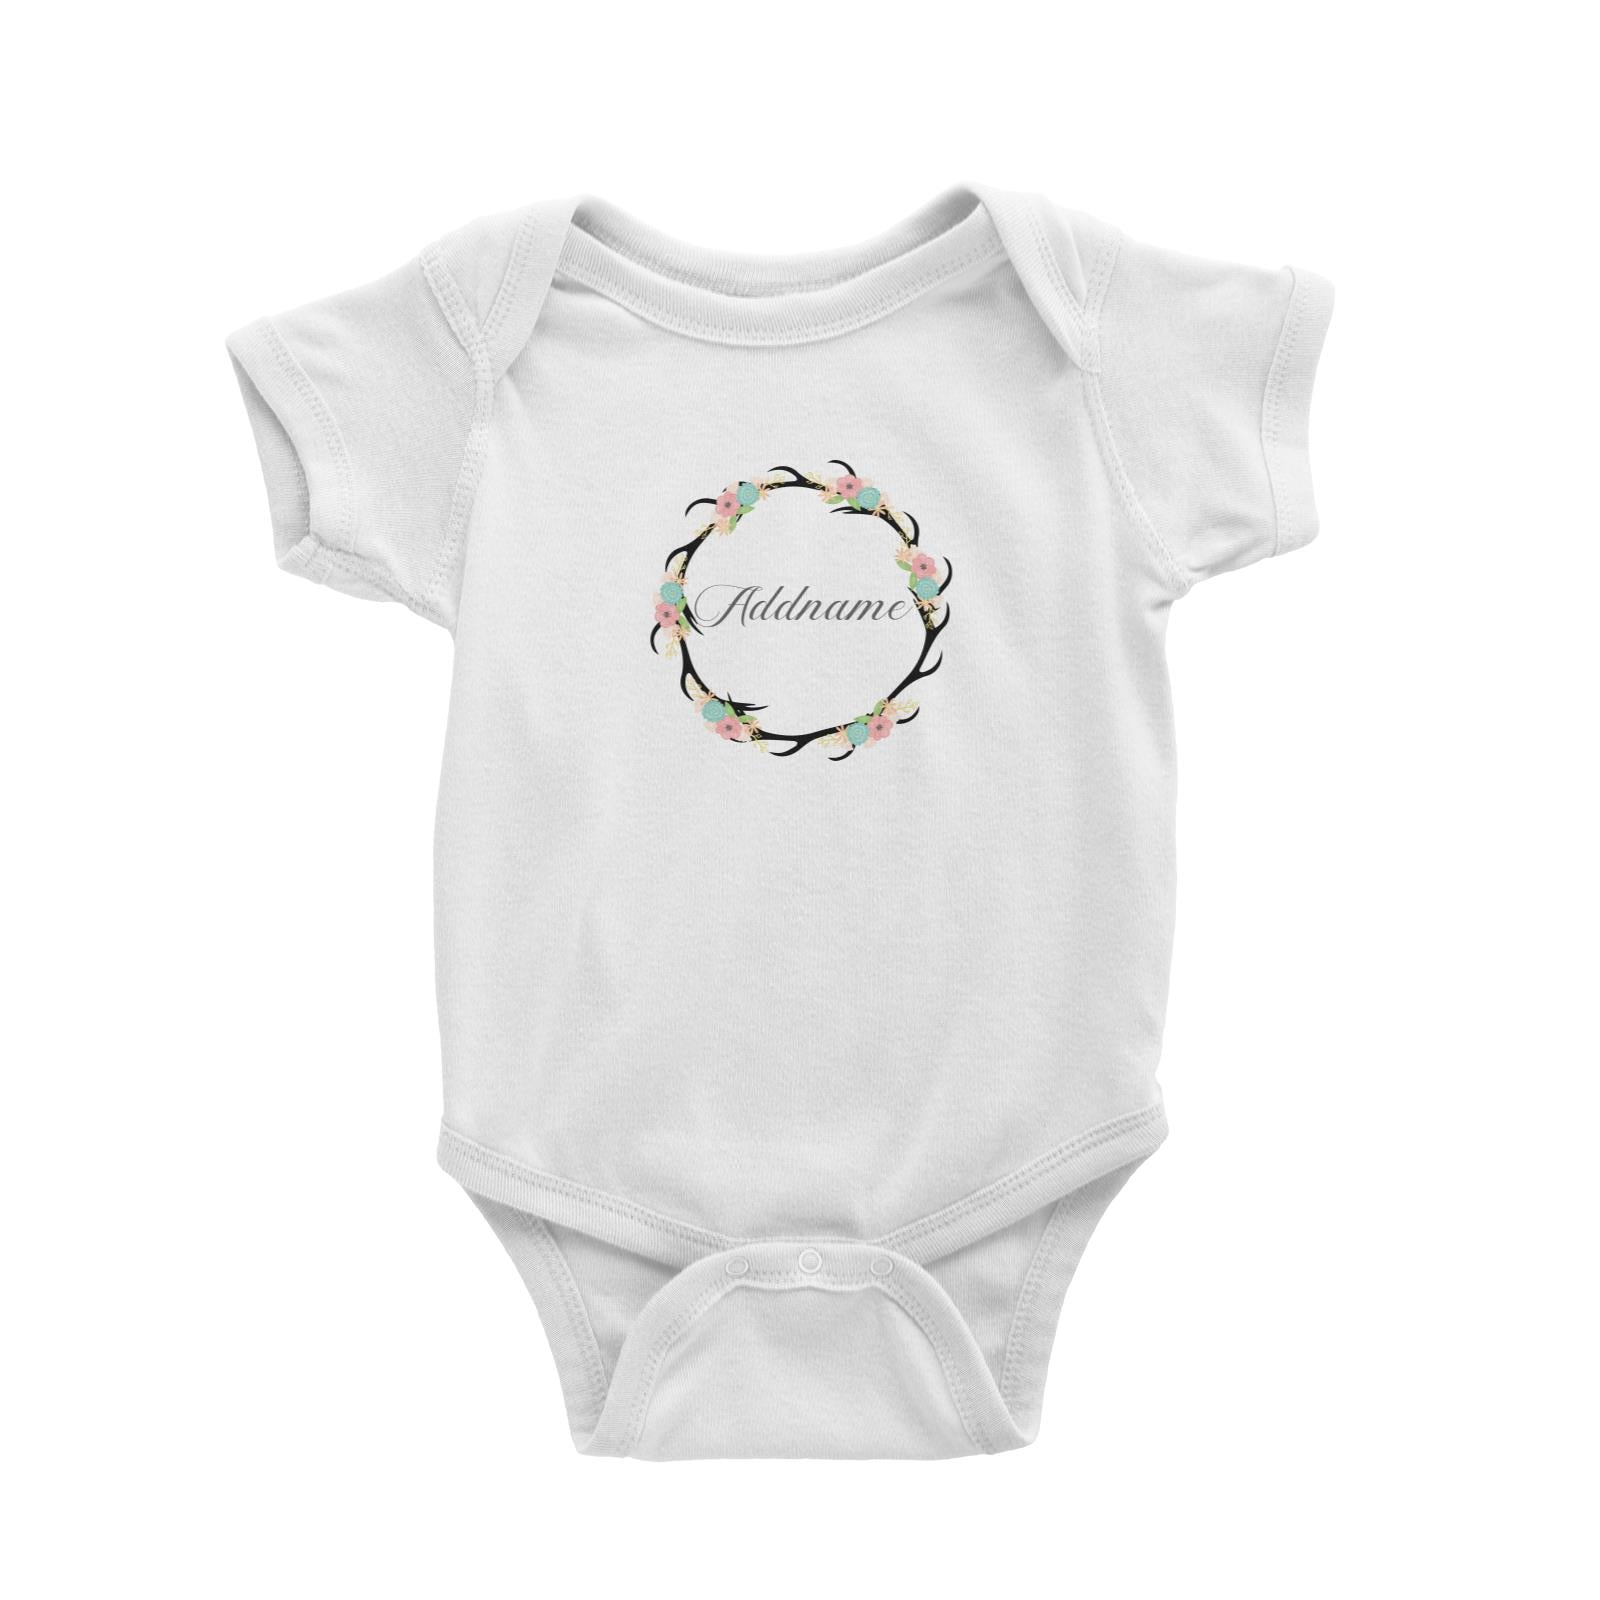 Basic Family Series Pastel Deer Flower And Antlers Wreath Addname Baby Romper